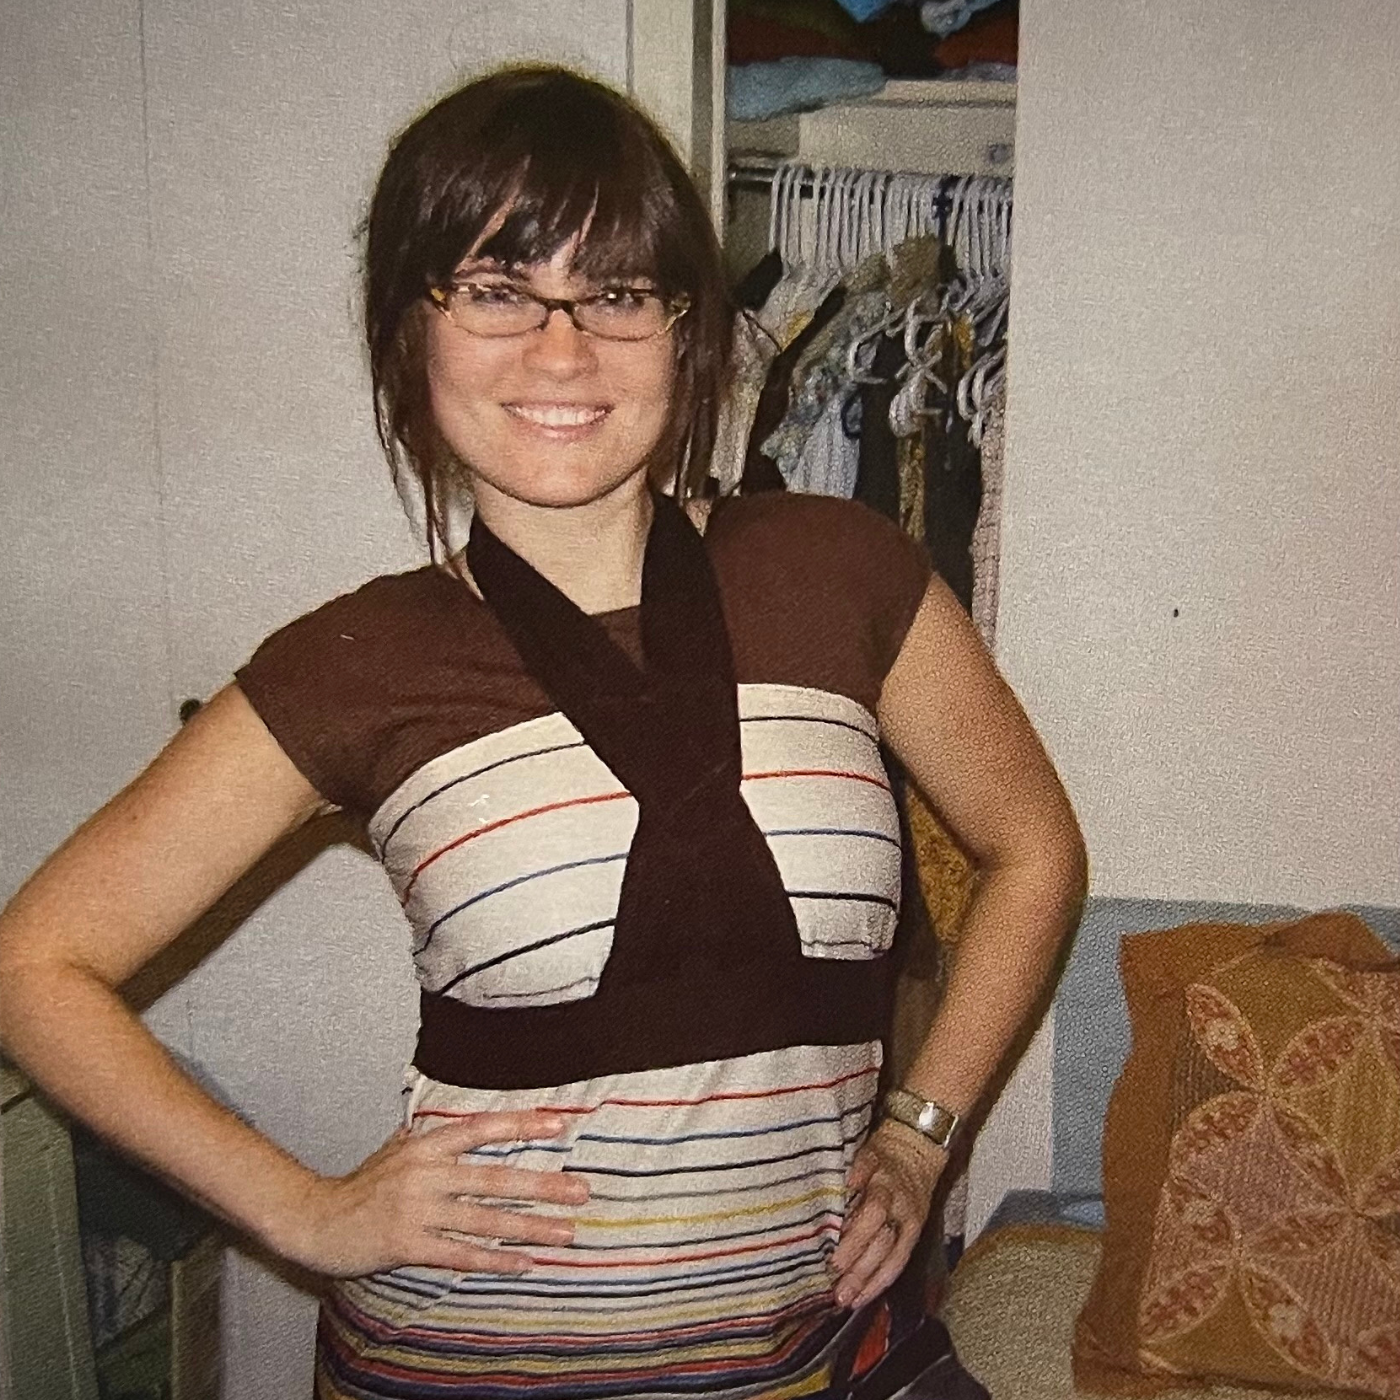 Katie Kortman stands with her hands on her hips wearing a dress made from a thrifted skirt. The dress has brown fabric at the shoulders and then moves into a striped design in cream, yellow, black, red and blue. A strip of dark brown fabric wraps around her chest and around her neck.